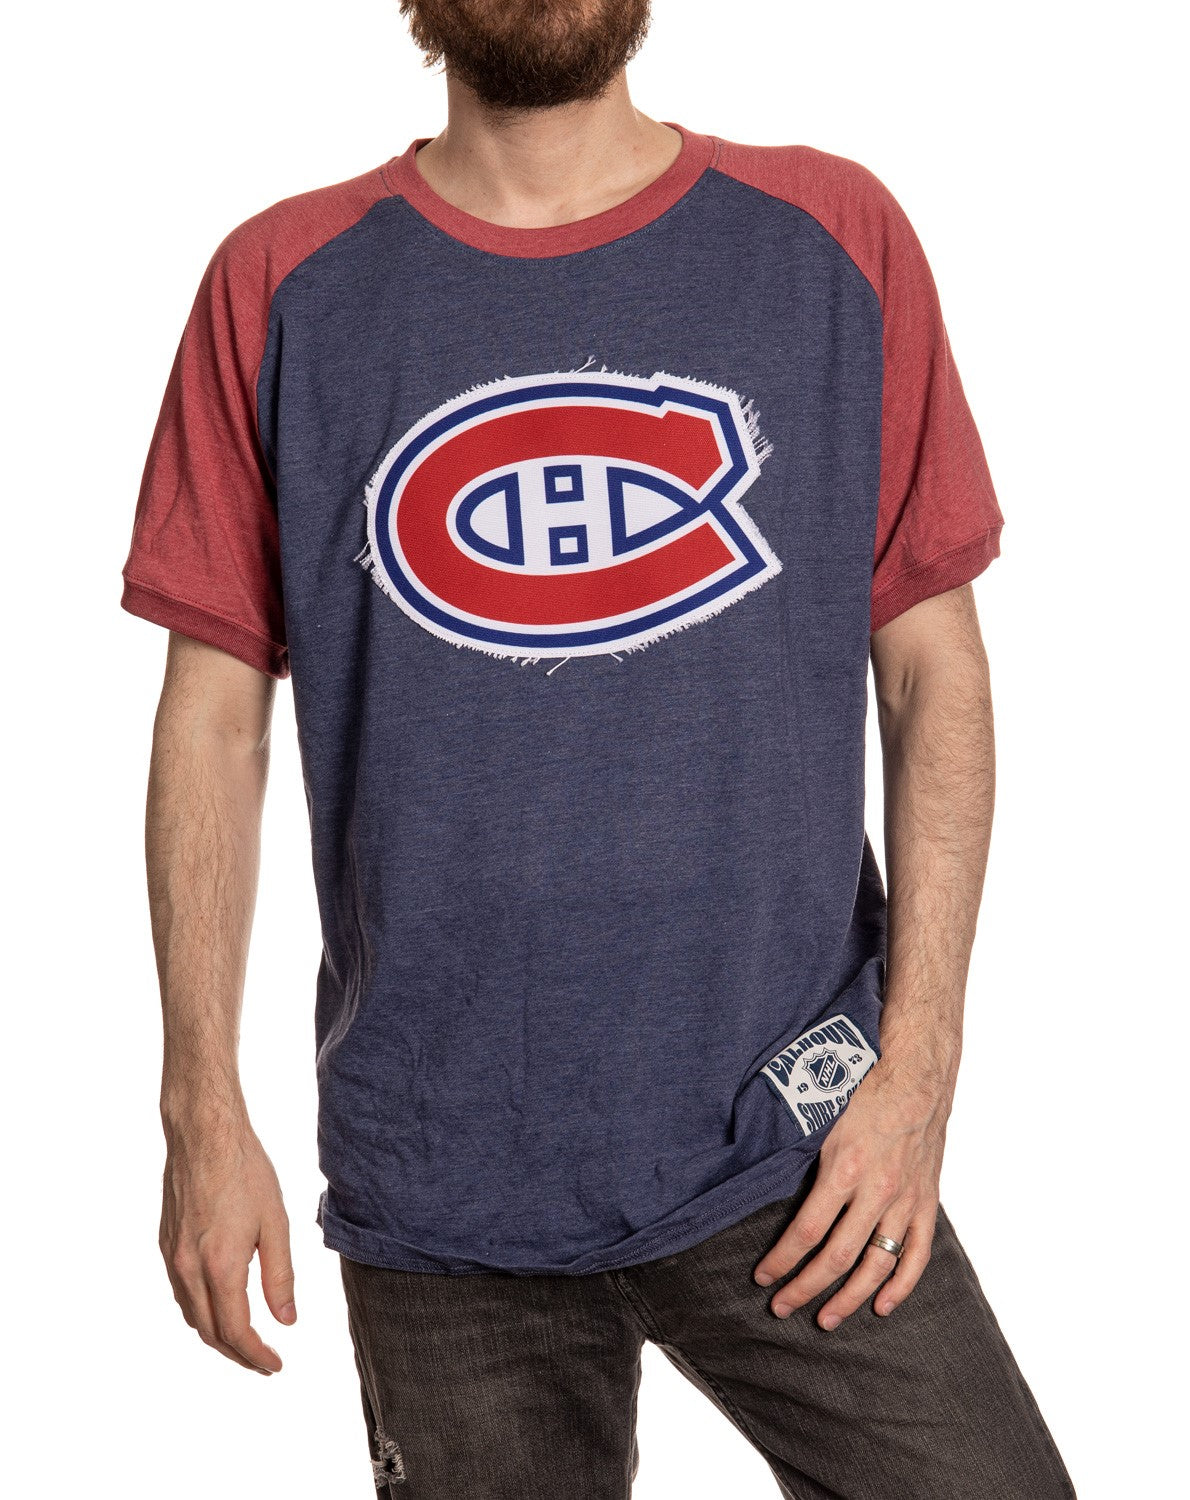 Montreal Canadiens Retro Raglan T-shirt. Blue Shirt With Red Sleeves and Frayed Logo Patch